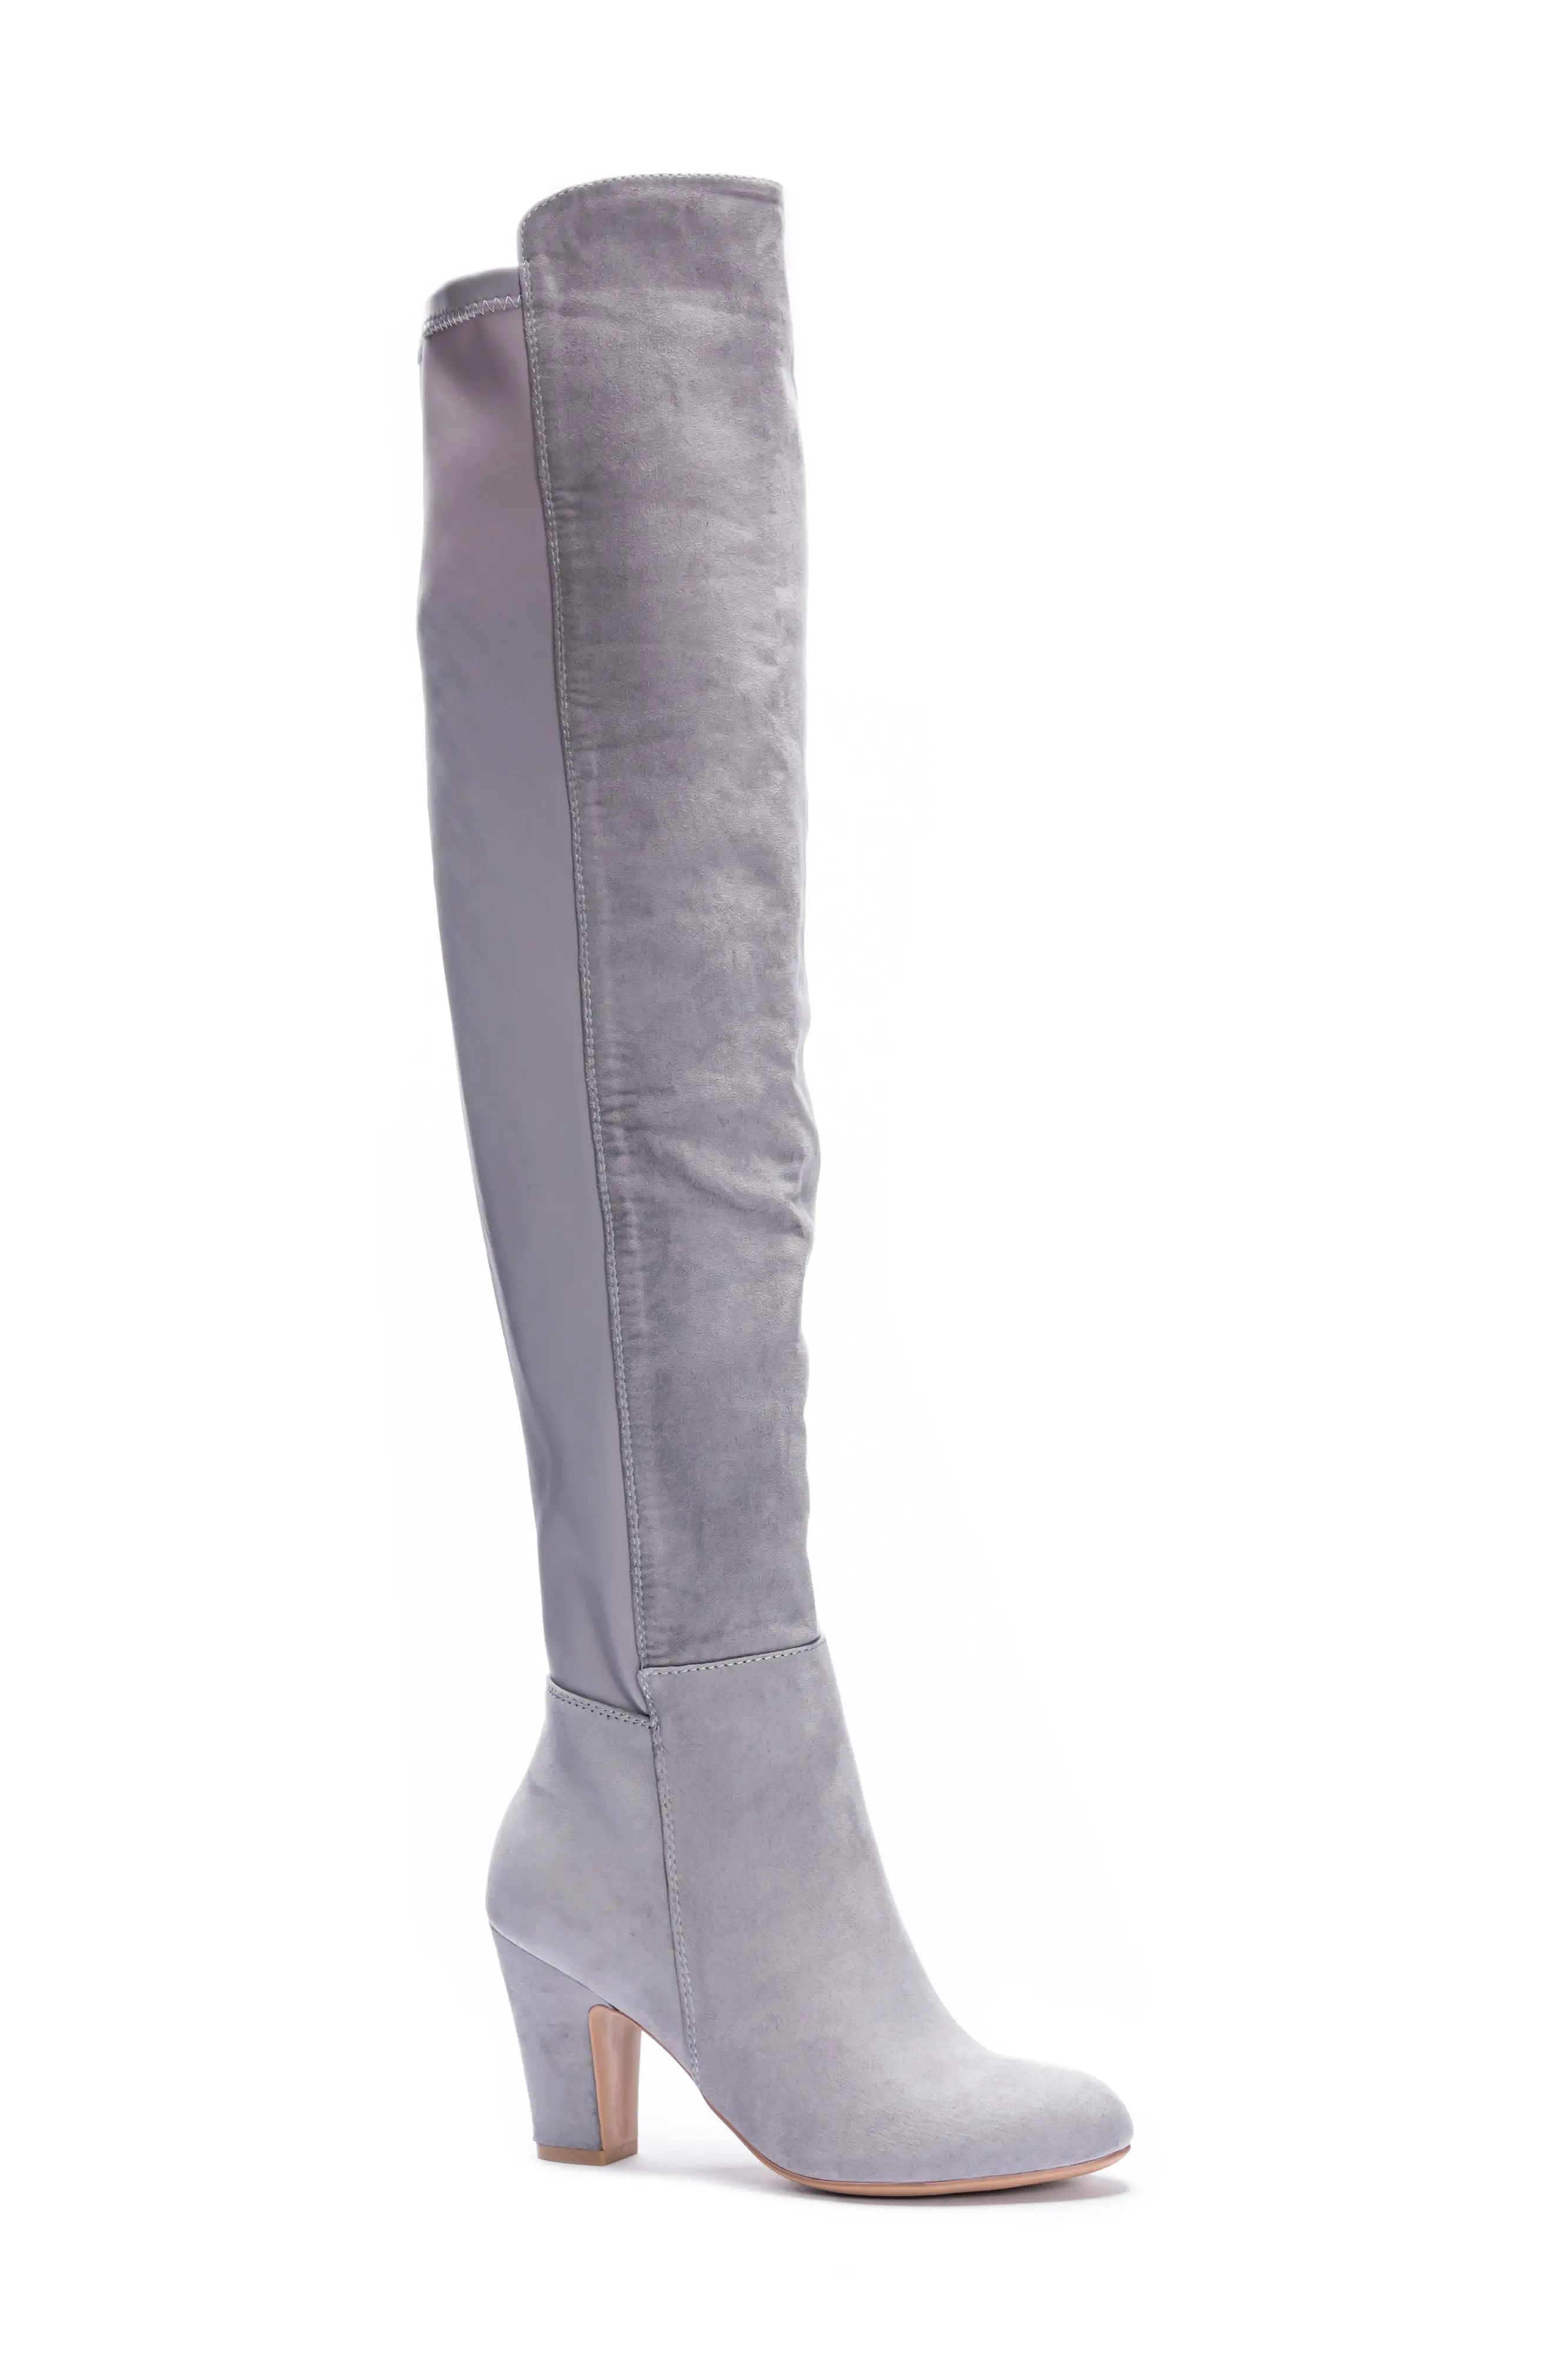 Chinese Laundry Canyons Over the Knee Boot, Size 9 in Grey Suedette at Nordstrom | Nordstrom